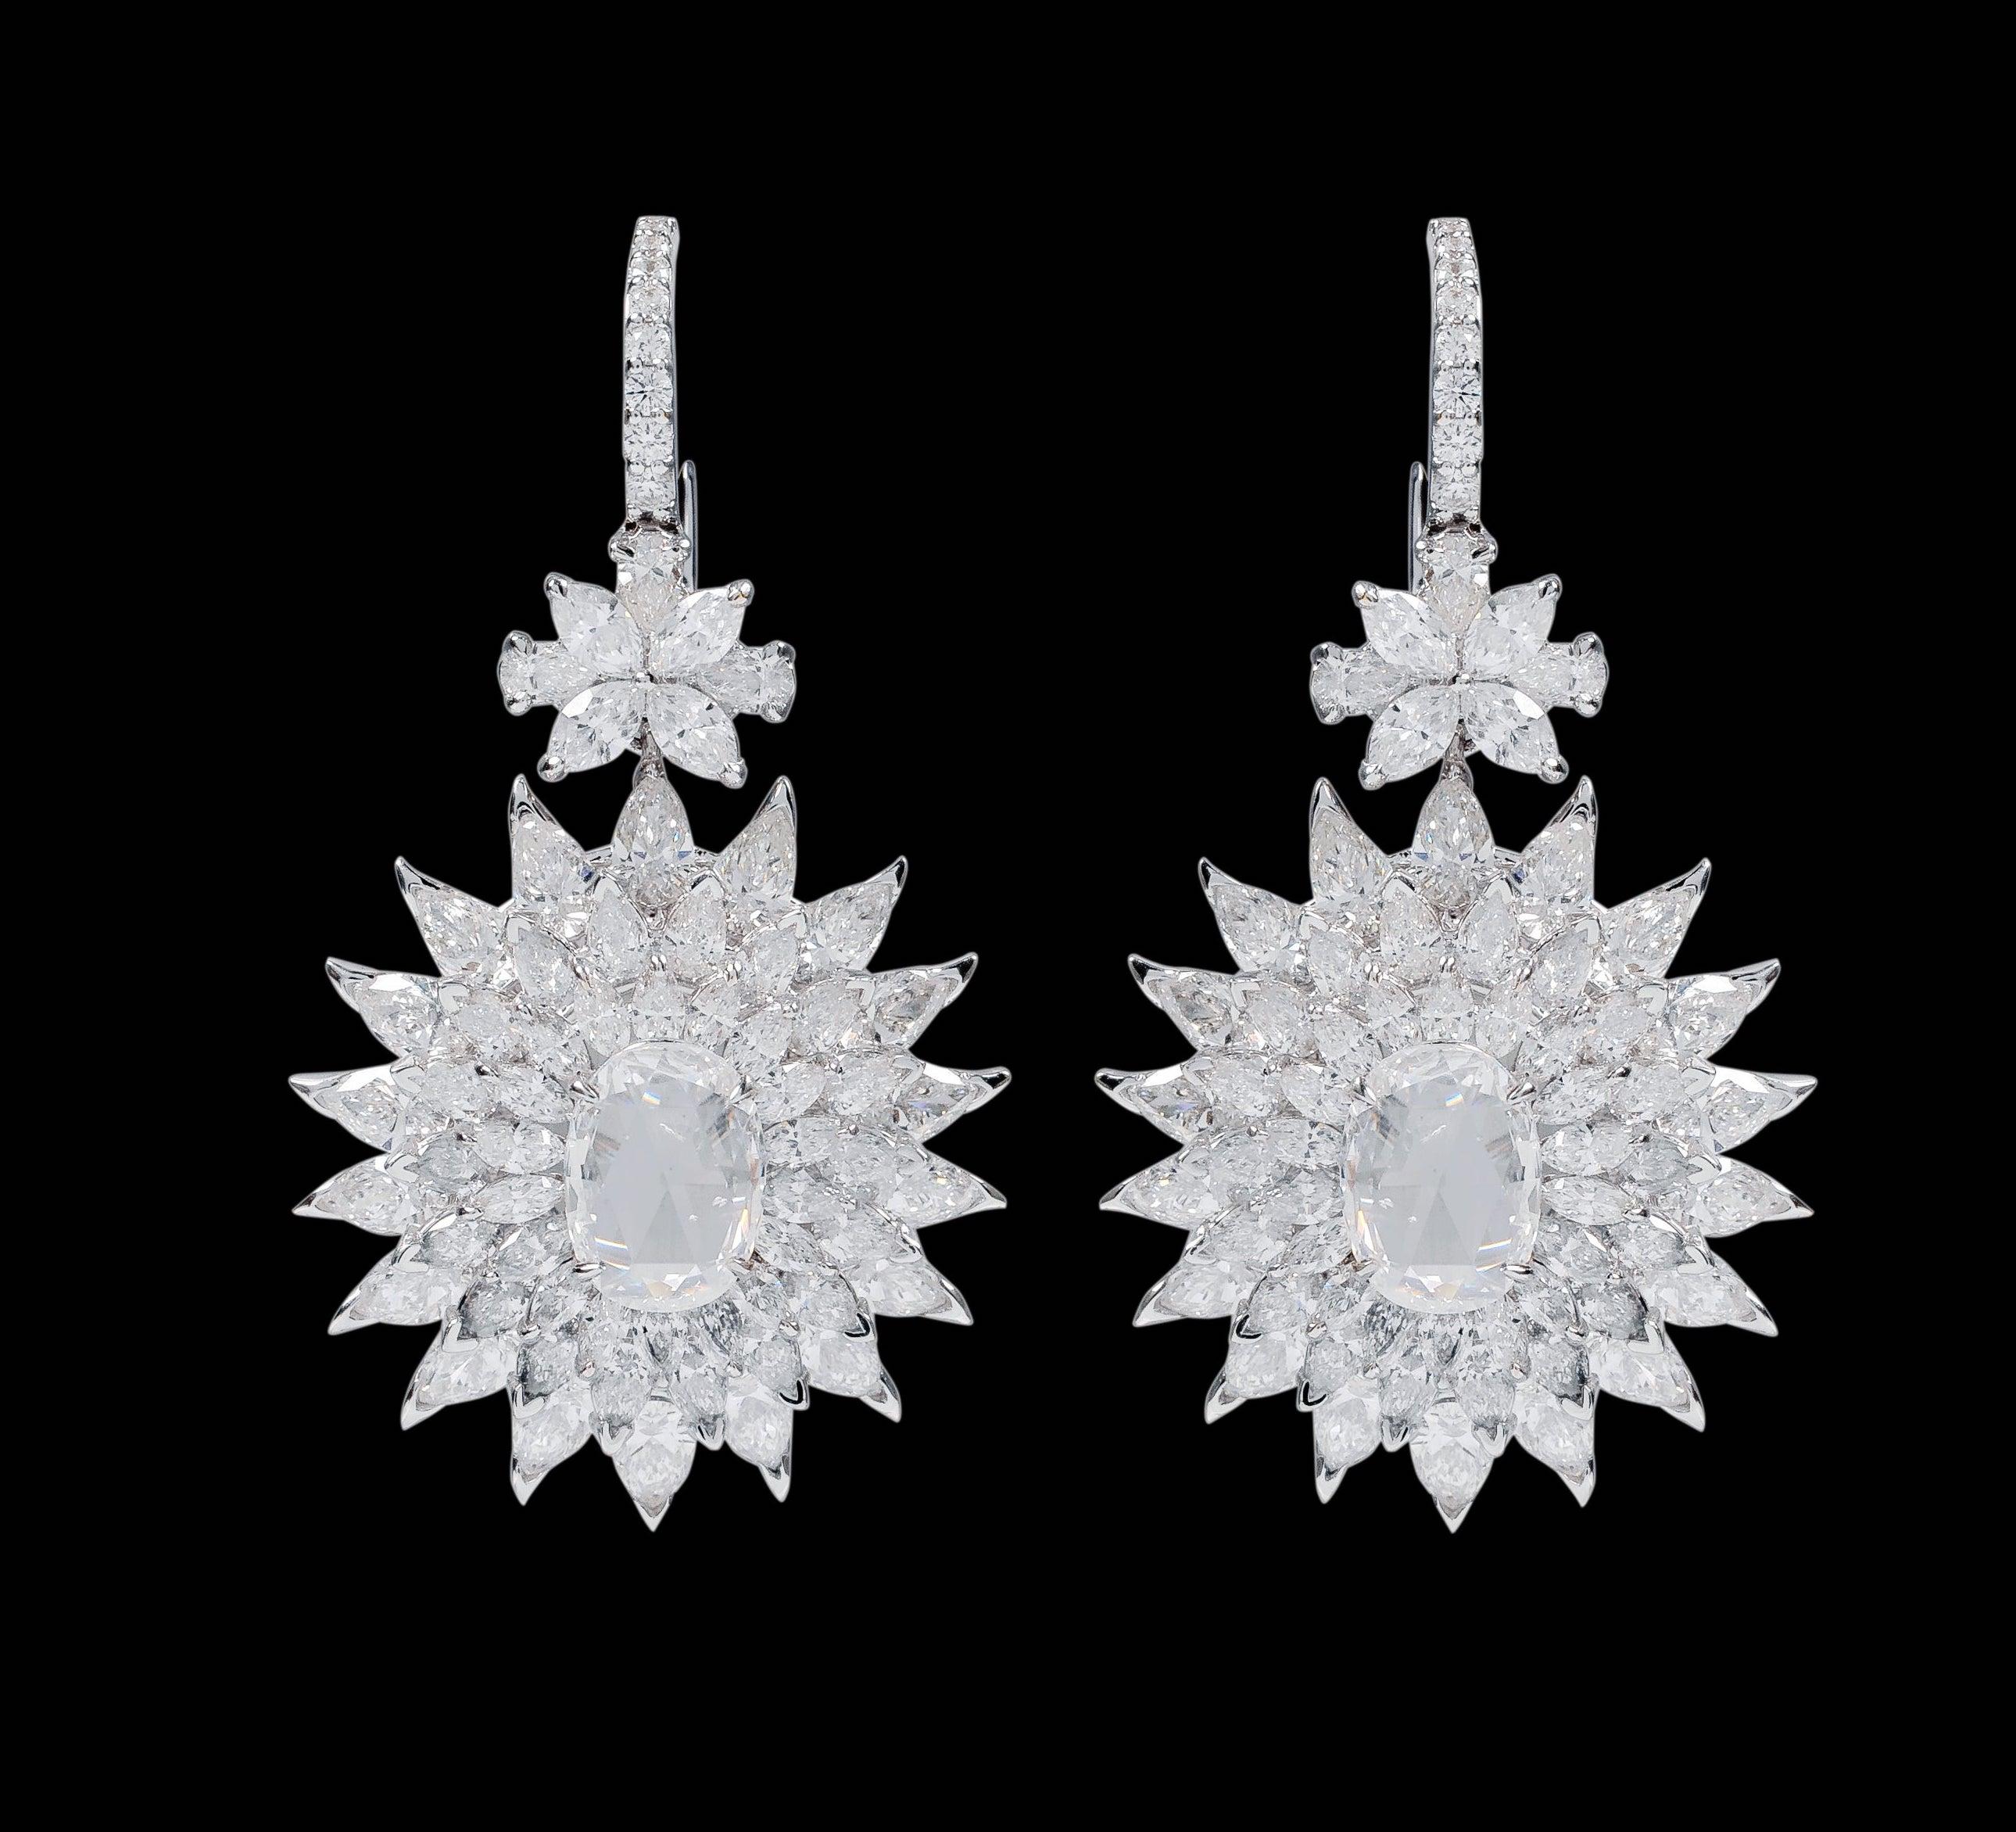 18 Karat White Gold 15.62 Carat Diamond Cocktail Drop Earrings

This complex 5-layer modulation sunburst diamond earring is remarkably brilliant. The design is skillfully crafted with the combination of solitaire marquise and pear diamonds in the